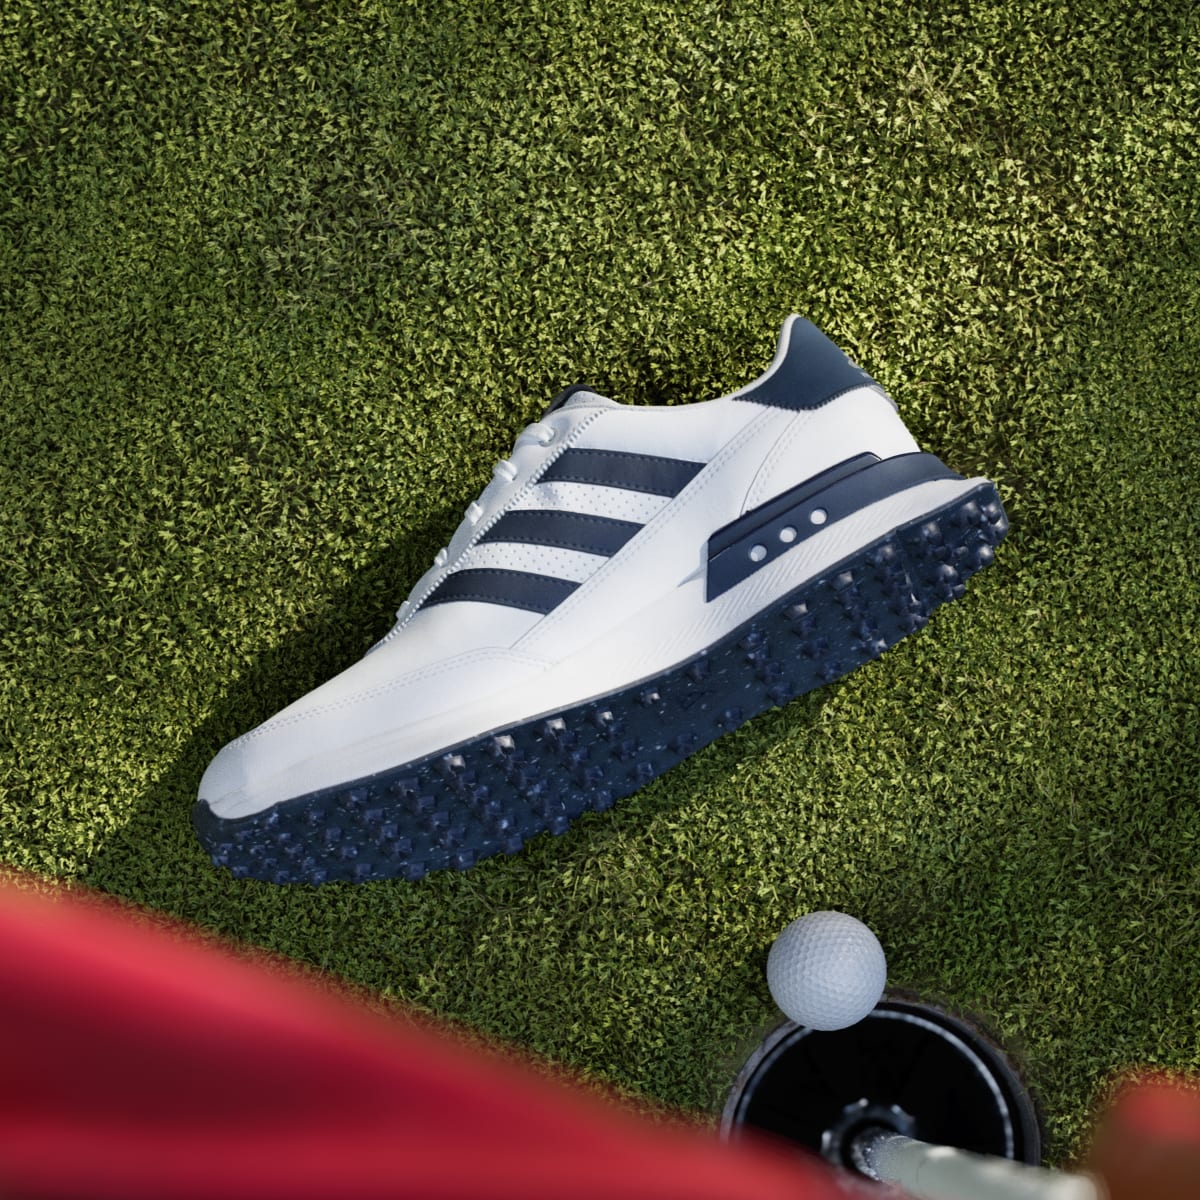 Adidas S2G Spikeless Leather 24 Golf Shoes. 6